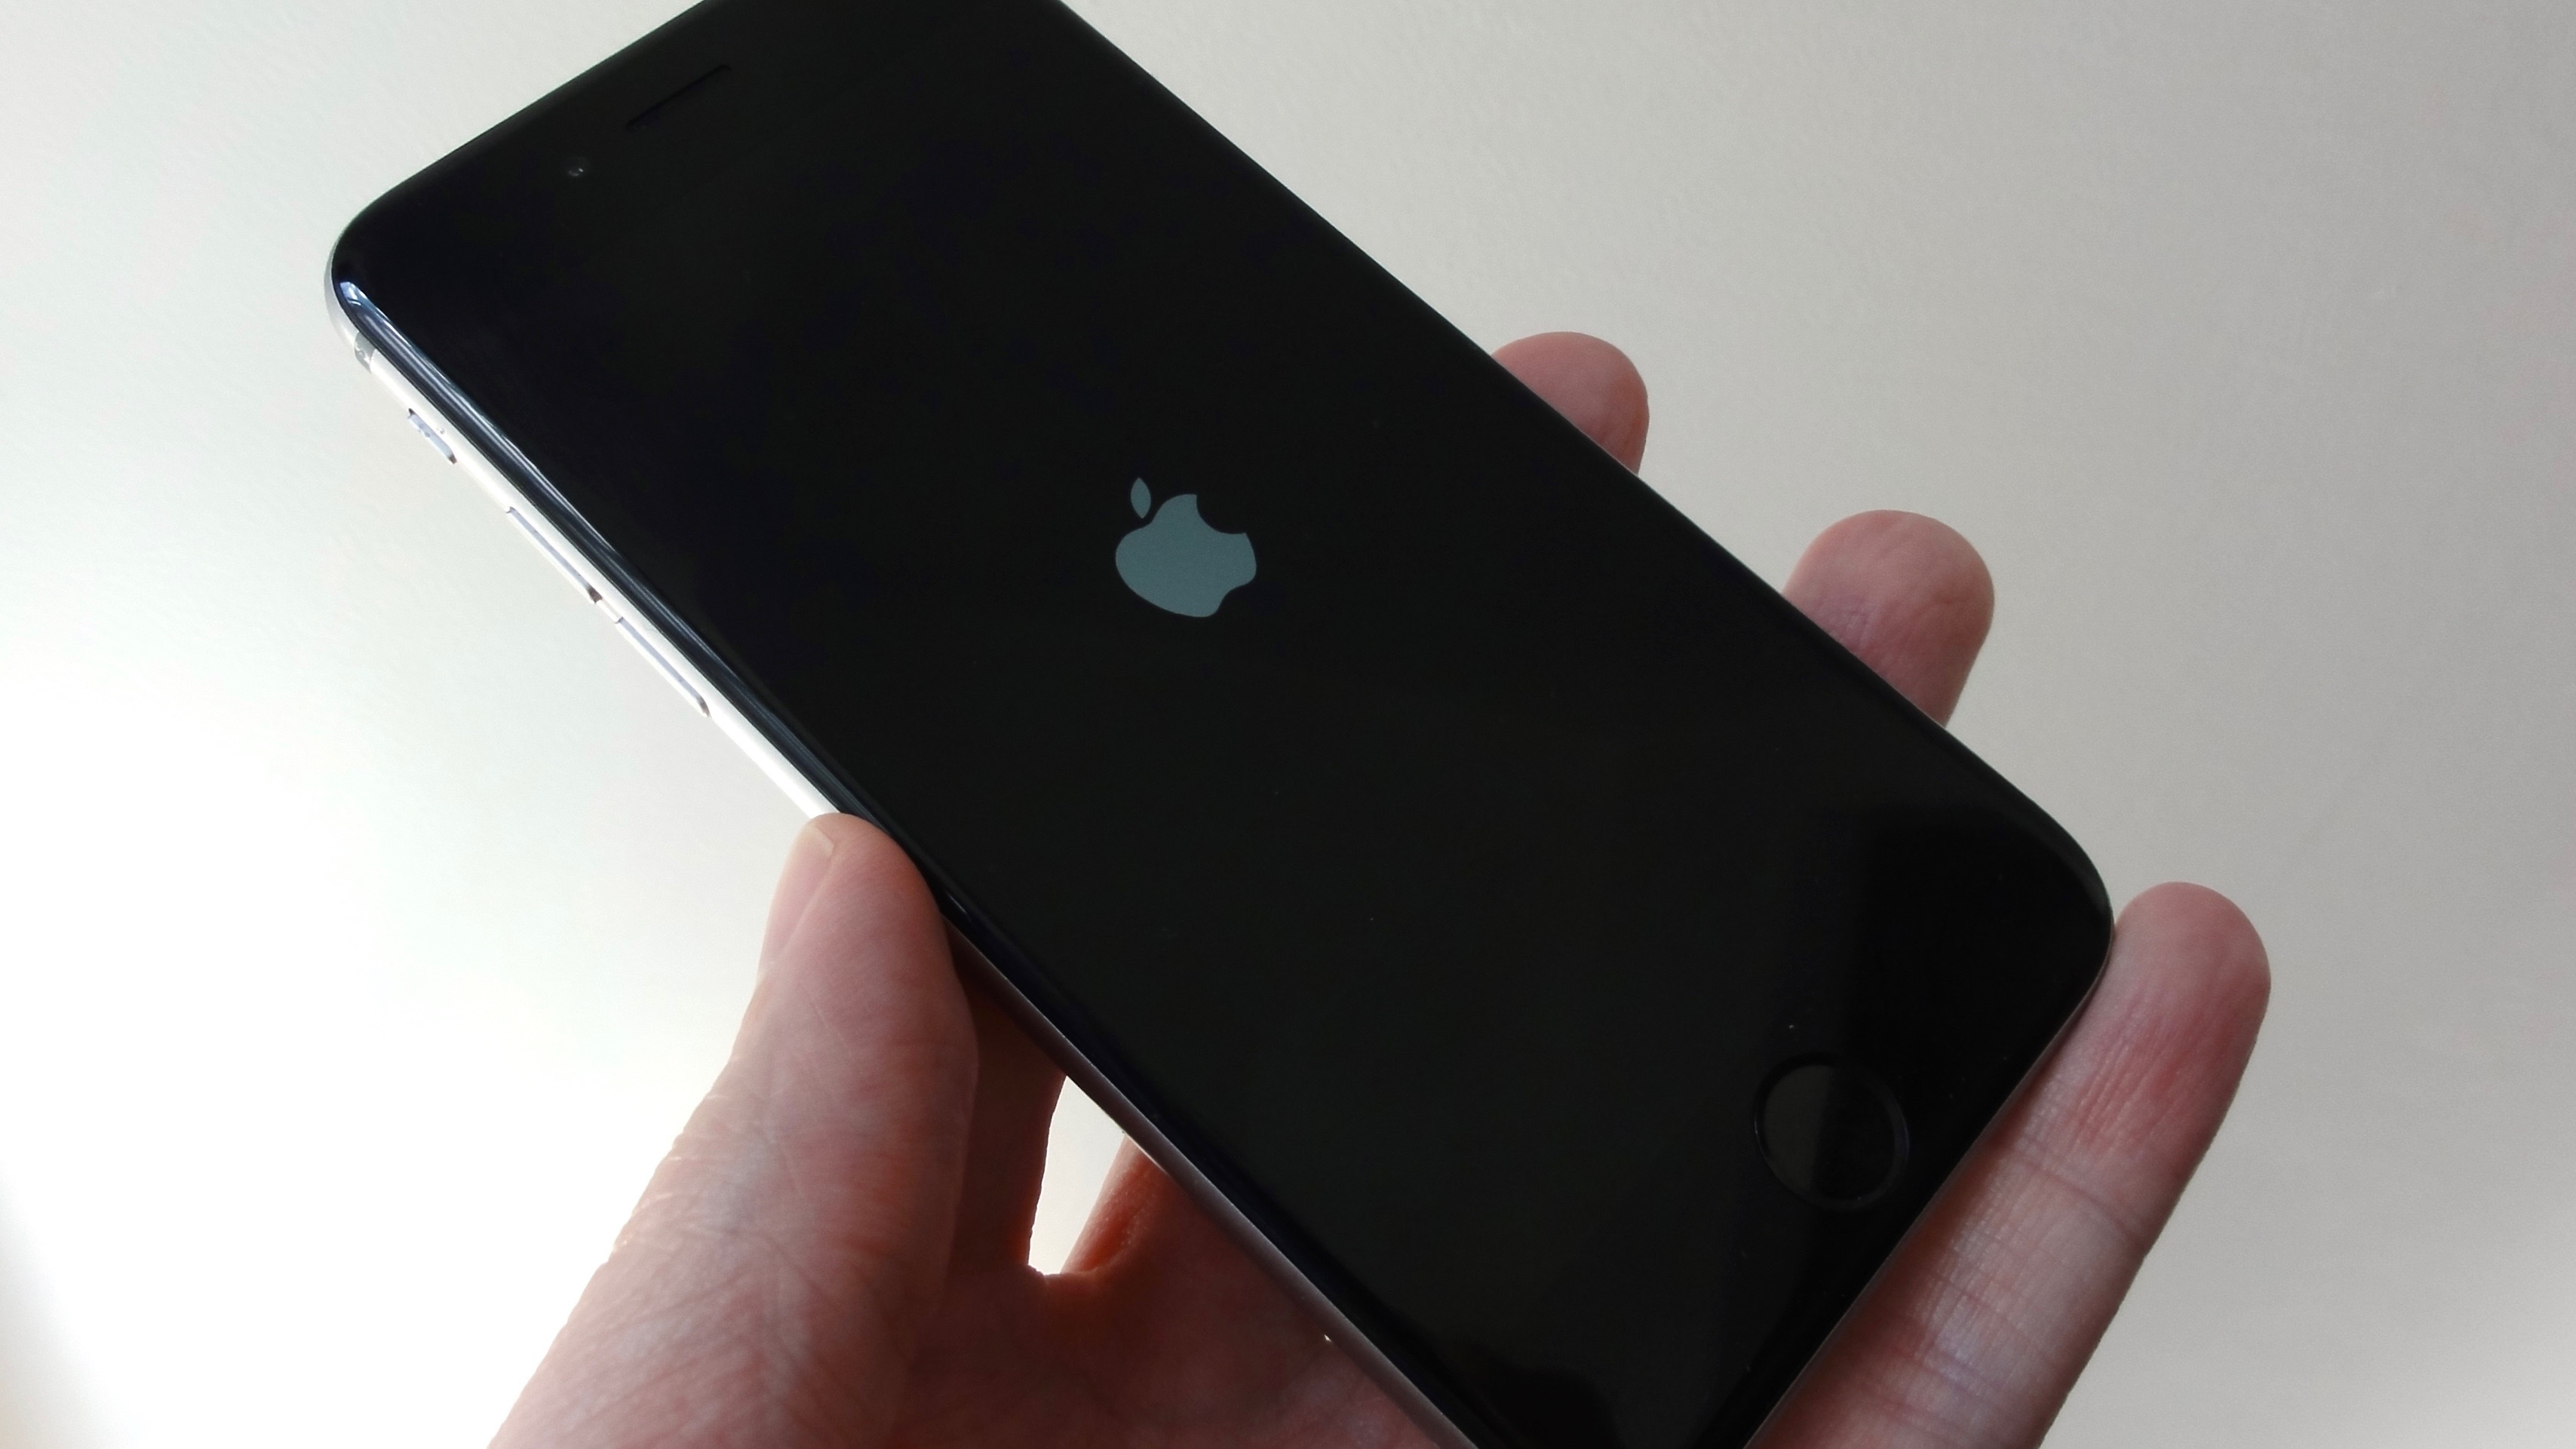 10 basic iOS tricks every iPhone owner should know | PCWorld